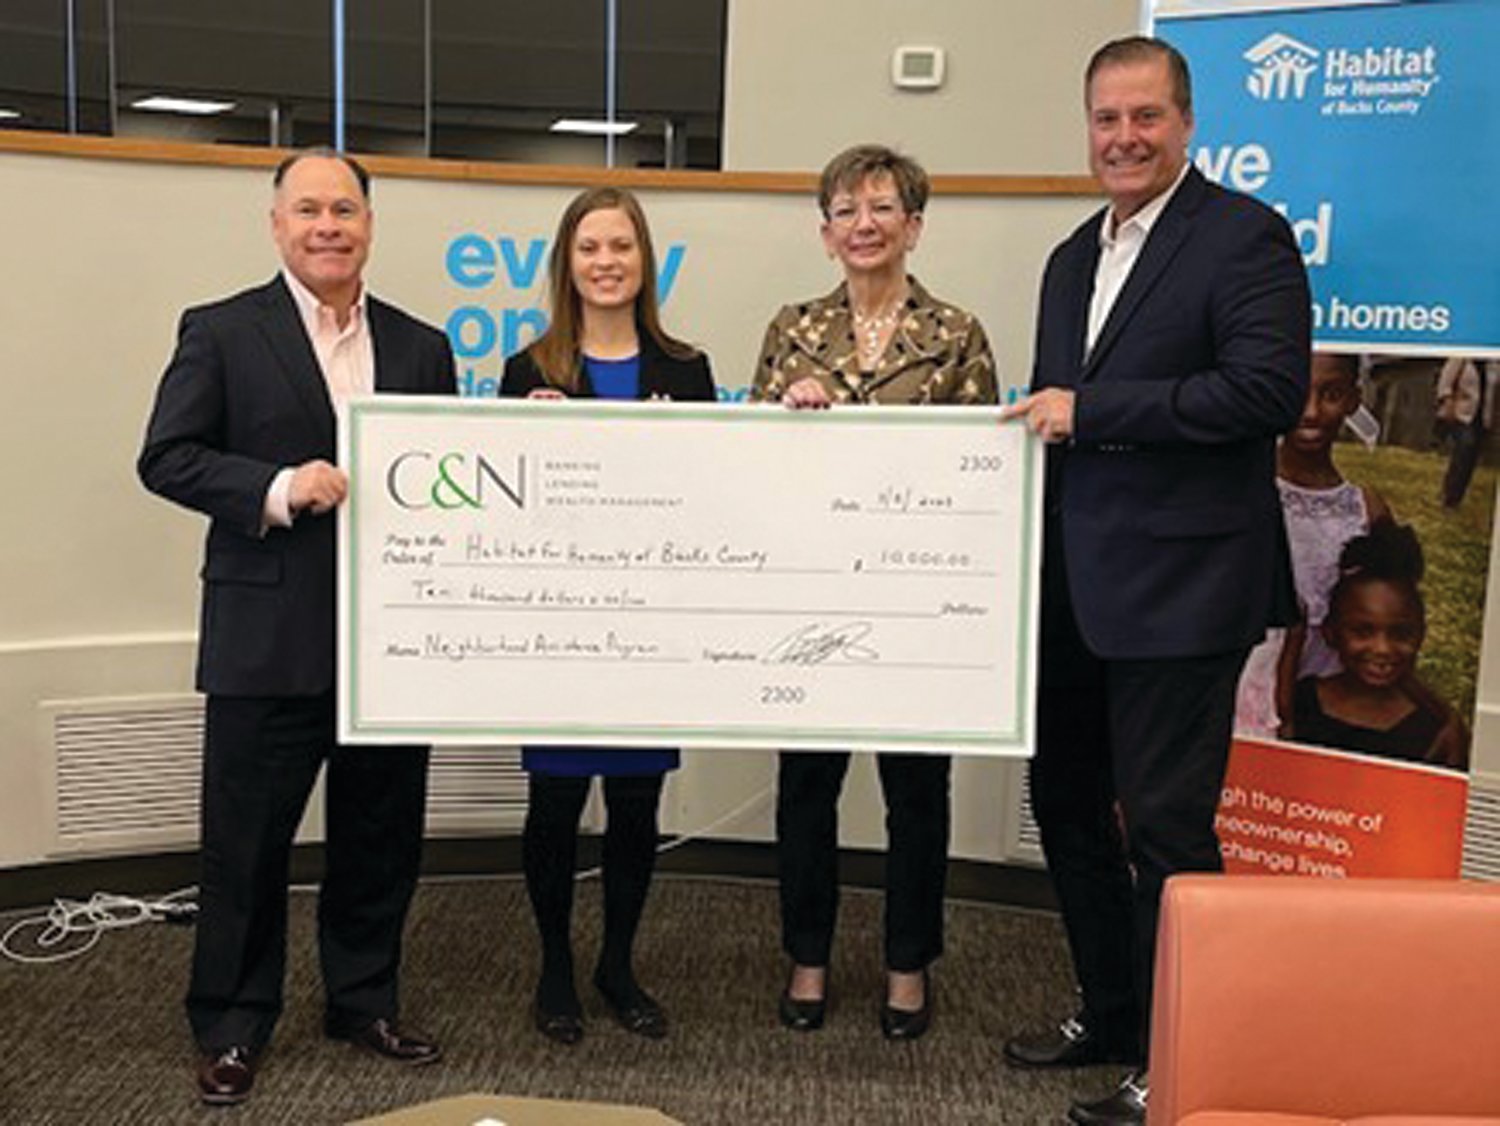 From left are Blair Rush, president Southeast Region, C&N; Kate Shepherd, VP; Commercial Lending Relationship Manager II, C&N; Florence Kawoczka, executive director, Habitat for Humanity of Bucks County; and Gary Pruden, board president, Habitat for Humanity of Bucks County.